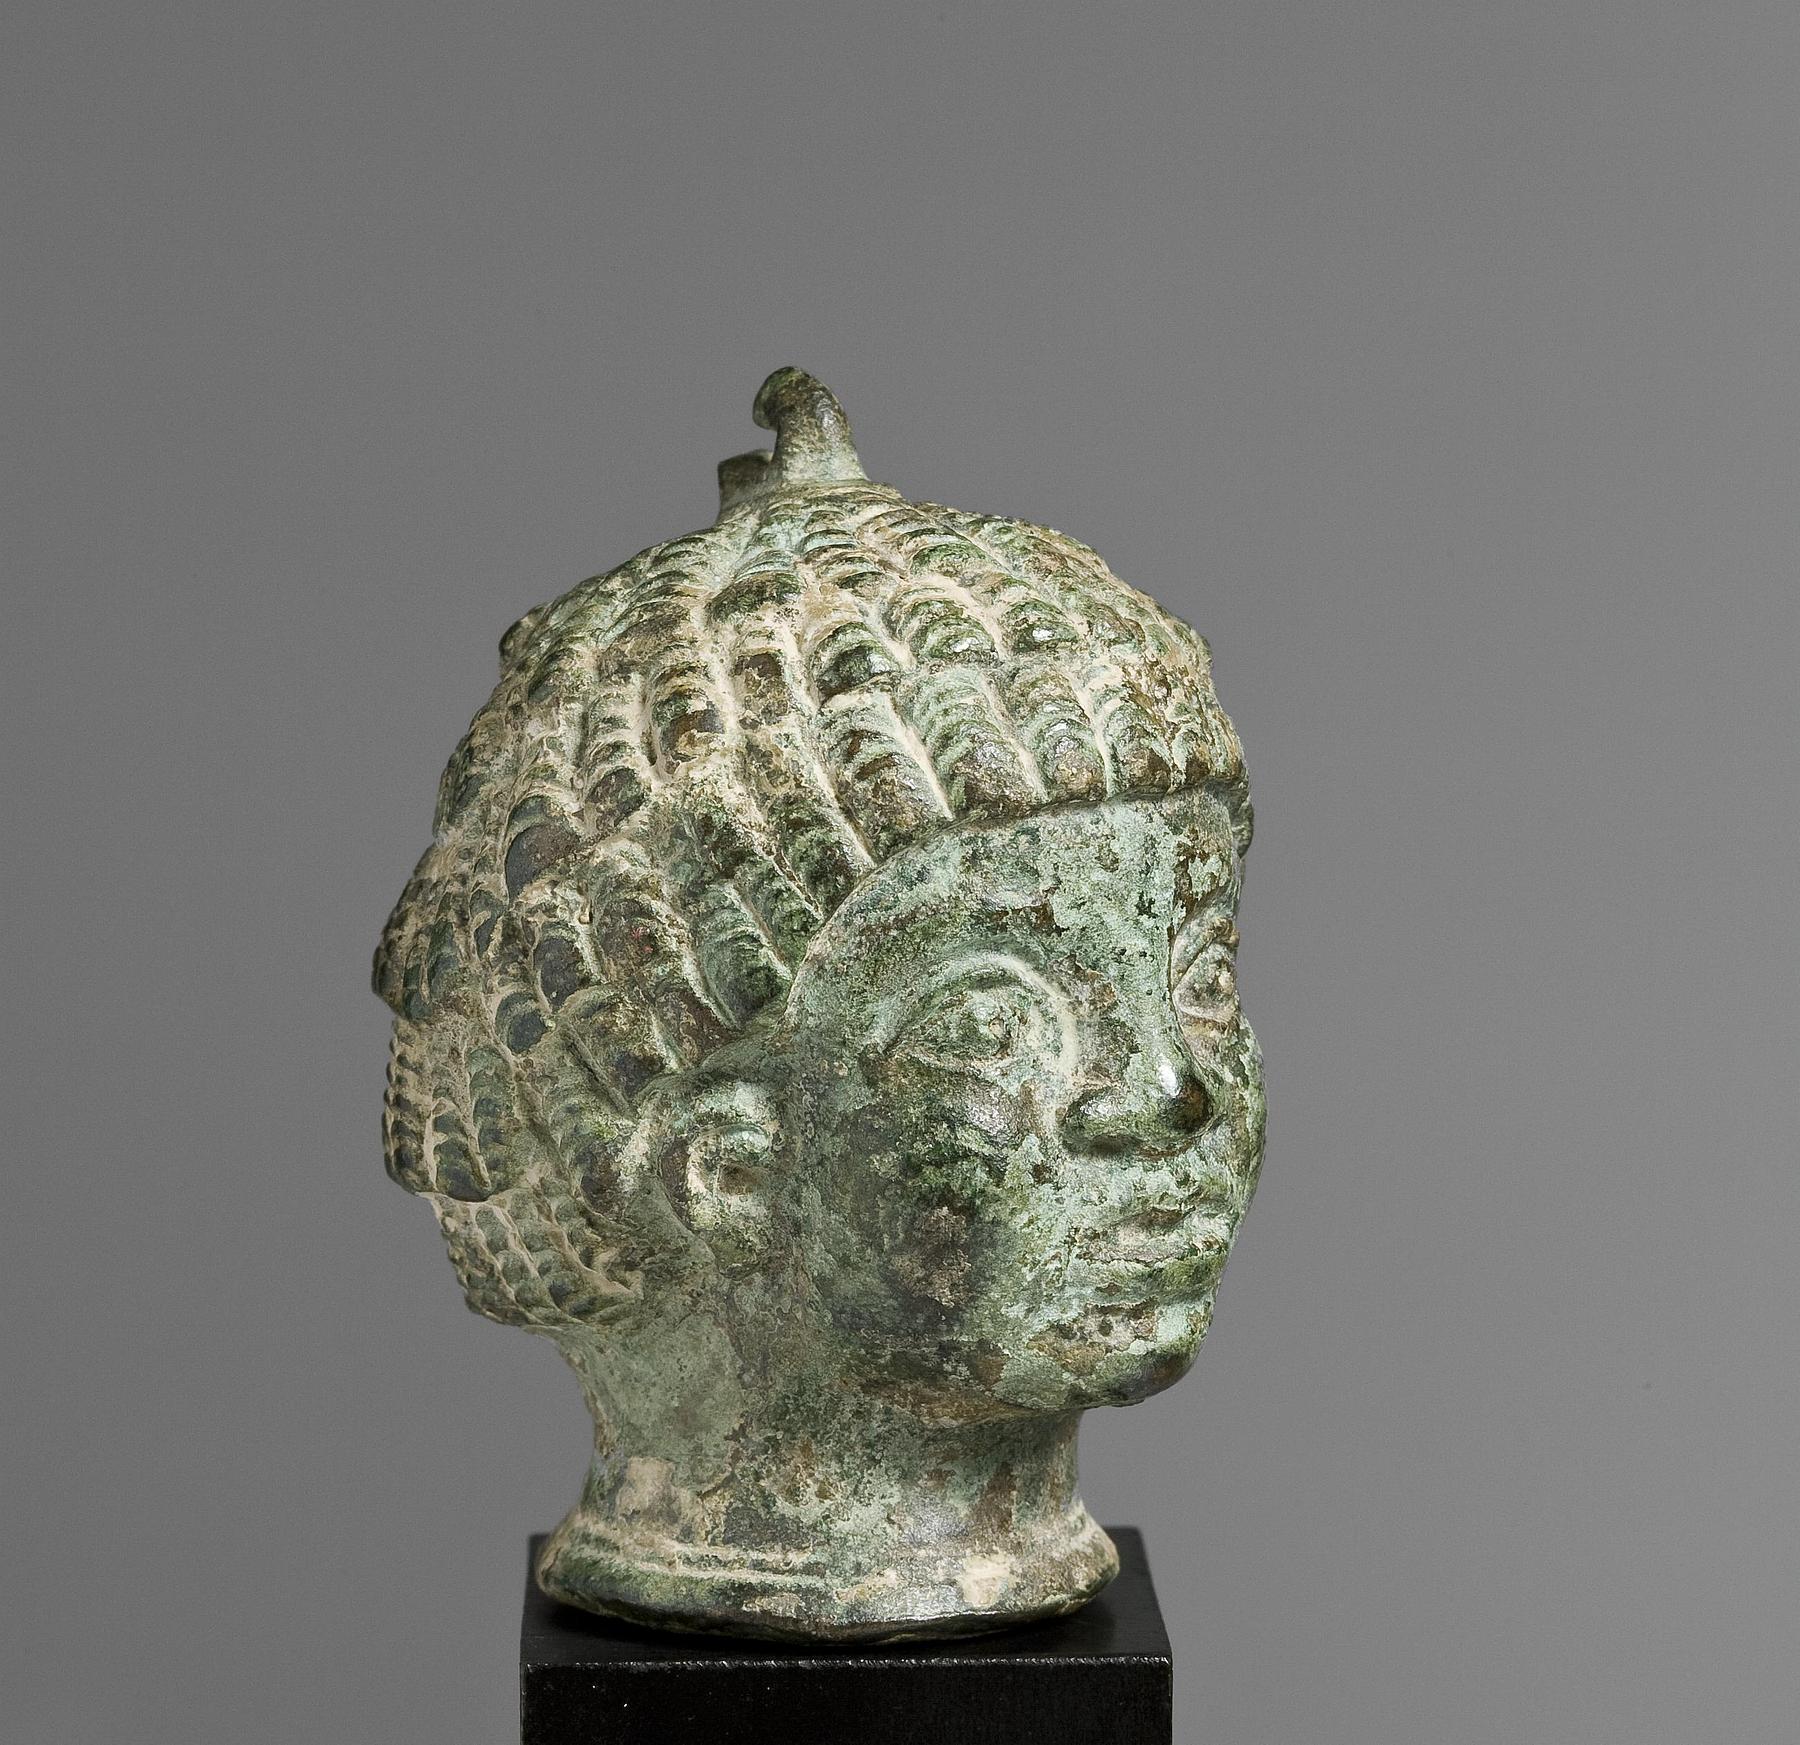 Weight in the shape of the head of an African boy, H2346